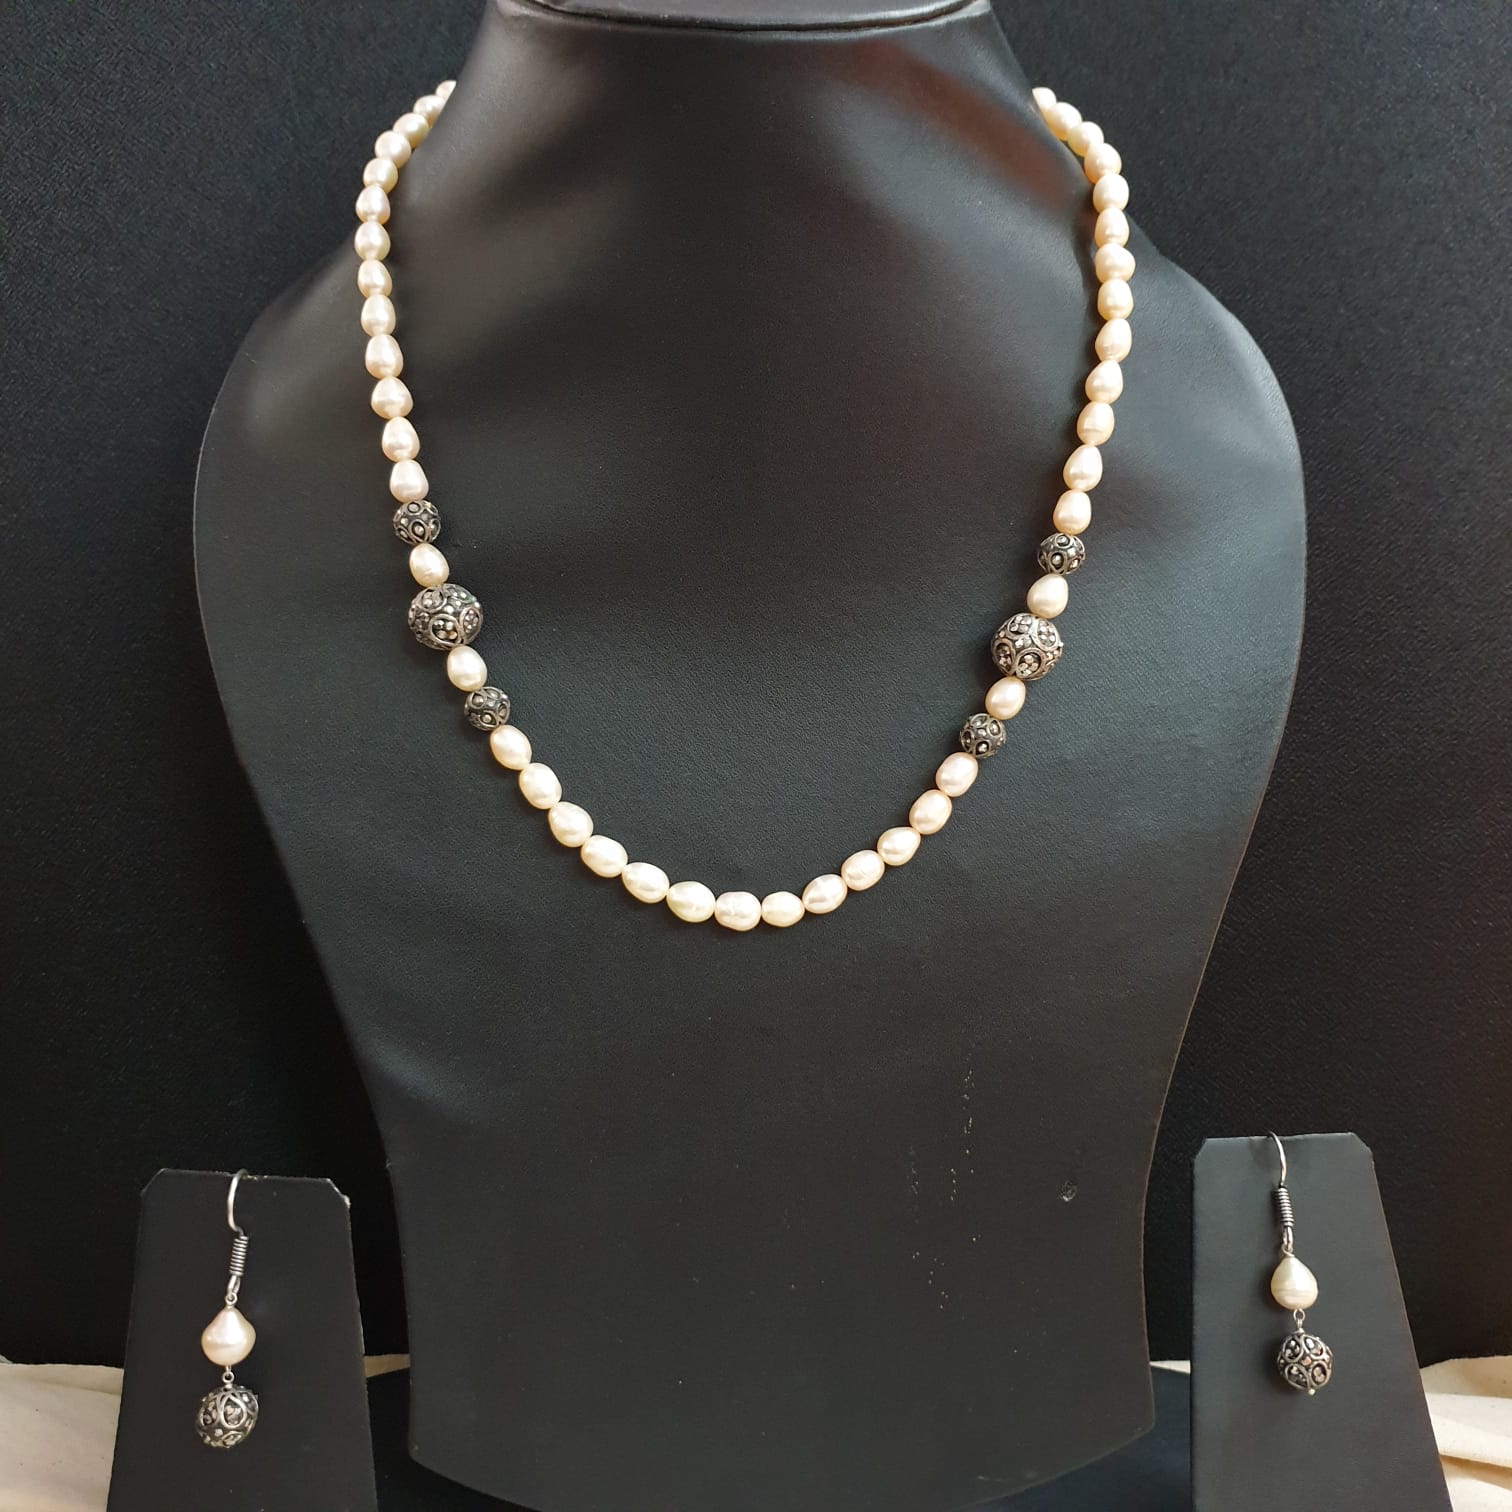 Baroque Pearl Antique Bead Necklace With Earrings